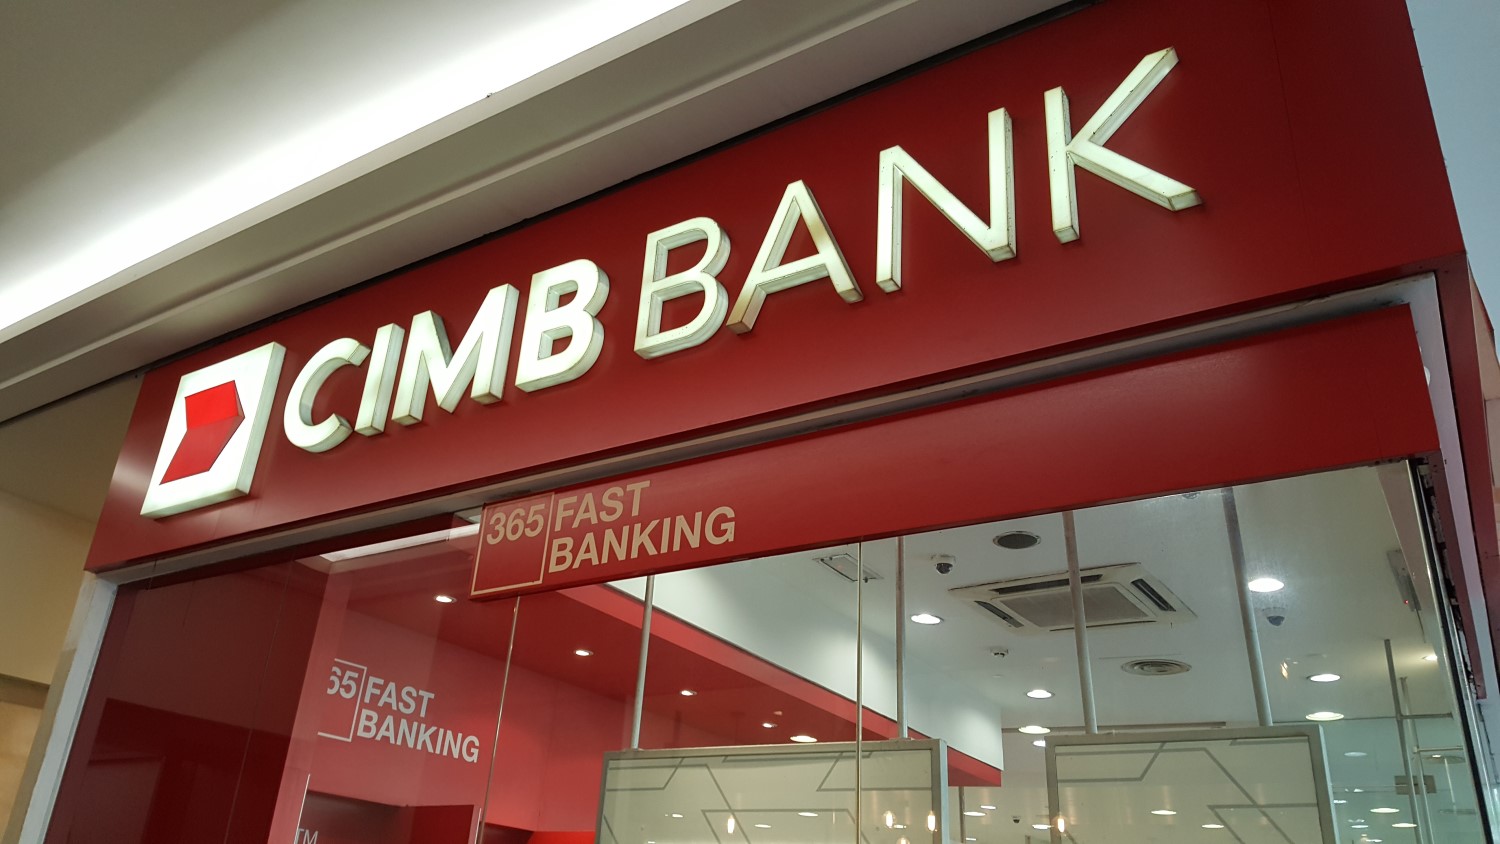 CIMB’s banking services still suffering from temporary disruptions